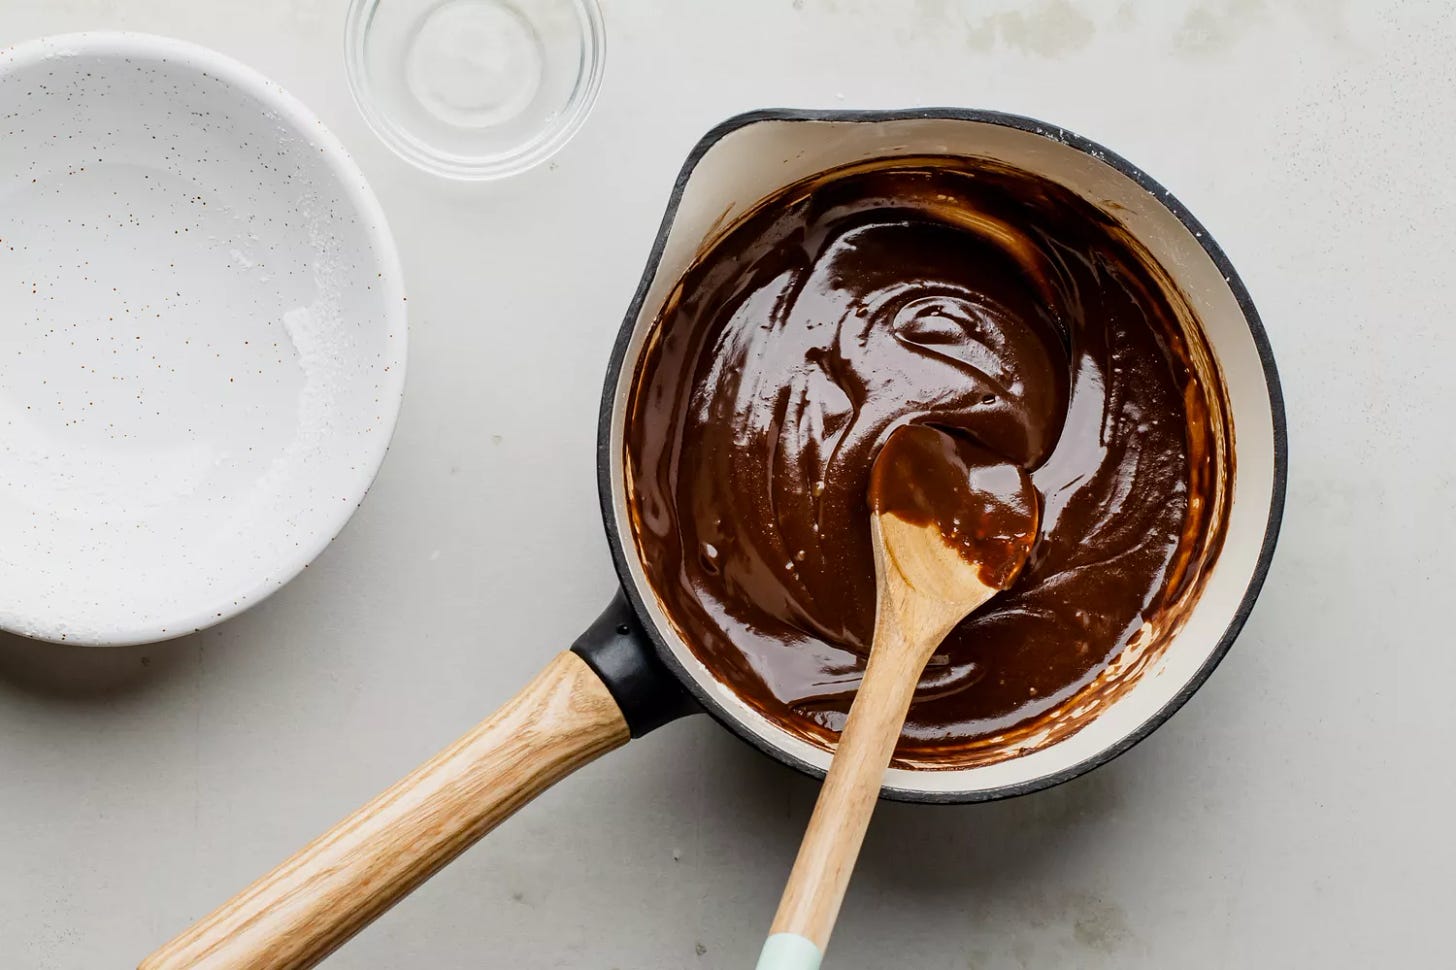 Sugar being stirred into smooth chocolate mixture with a wooden spoon